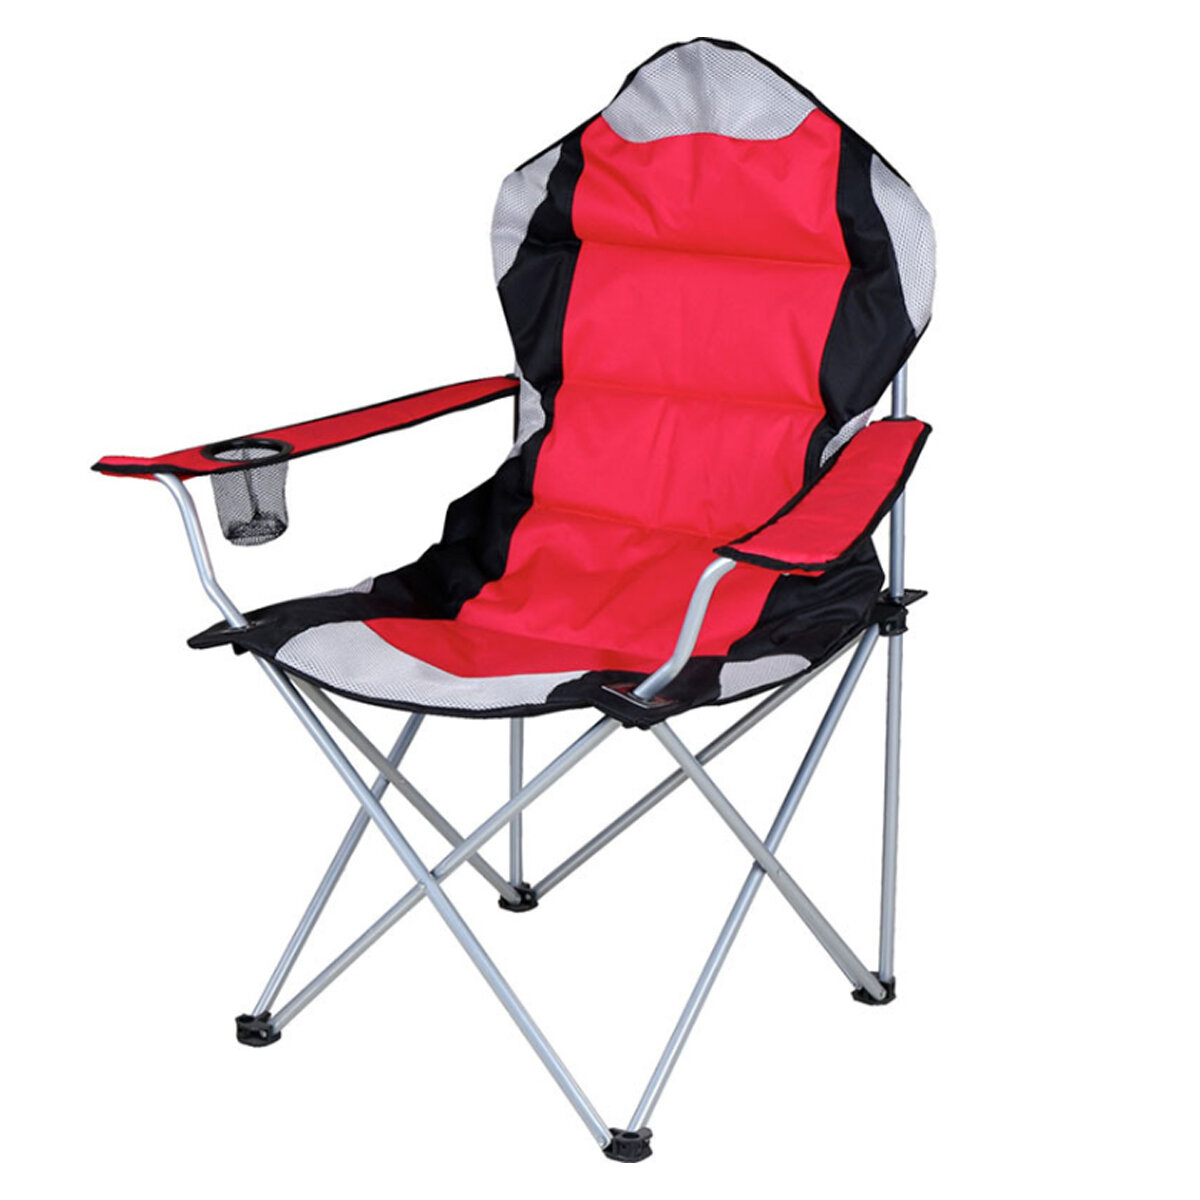 60x60x100CM Folding Camping Chair Heavy Duty Portable Fishing Chair  Ultralight Beach Seat with Cup Holder Sale - Banggood USA Mobile-arrival  notice